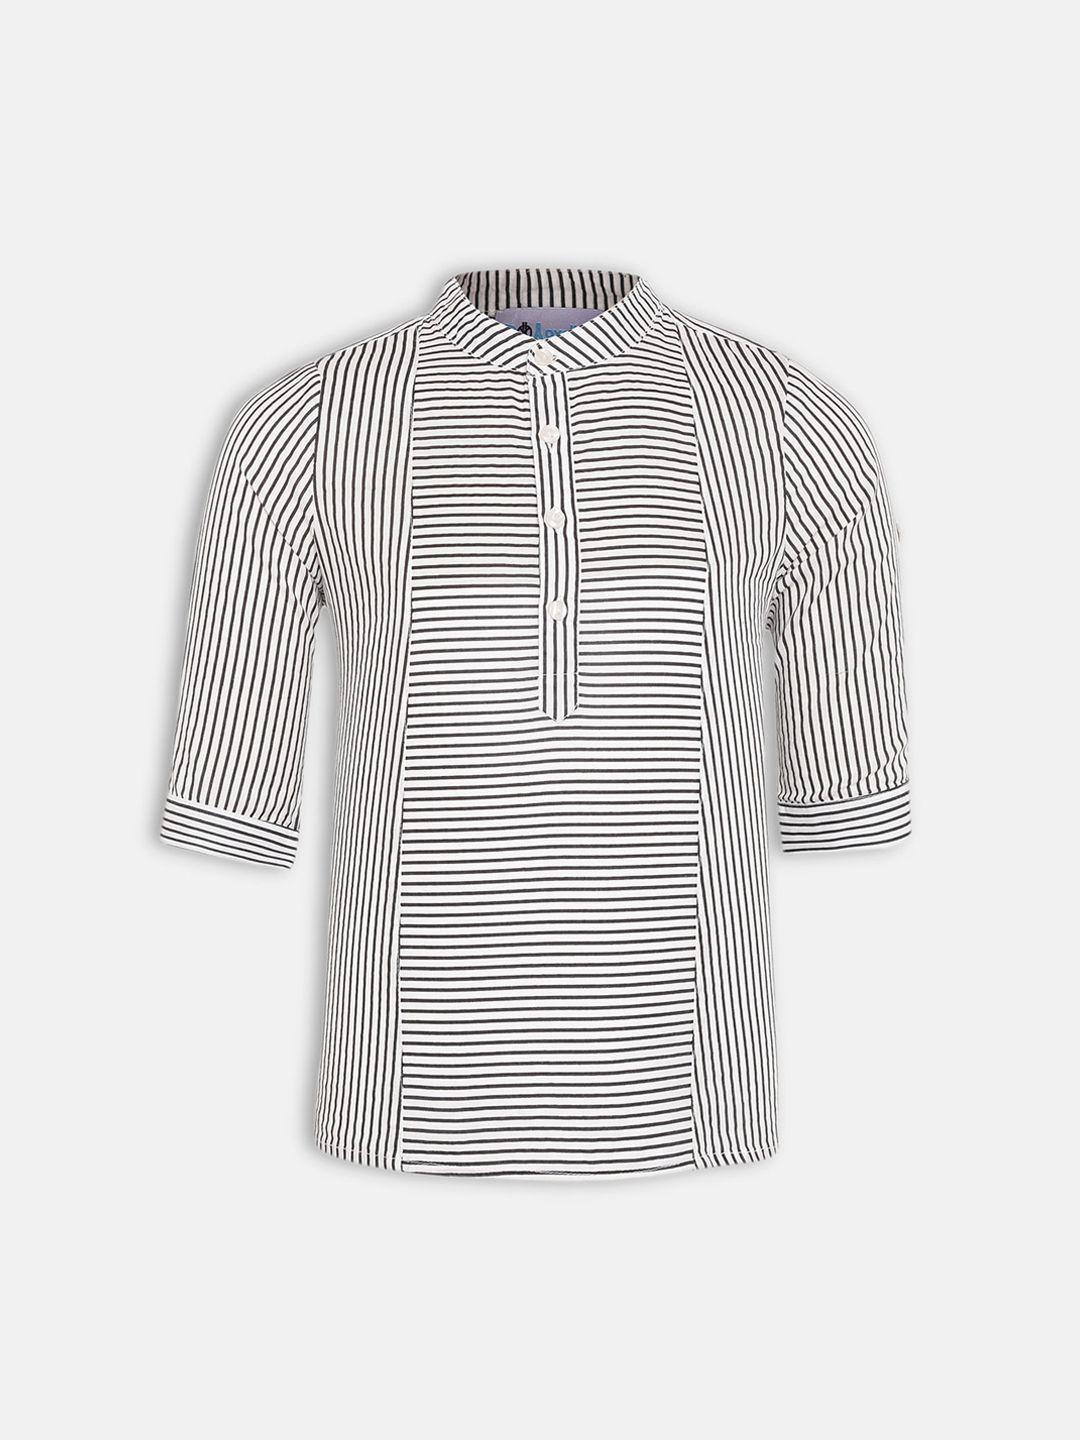 oxolloxo boys grey and black striped casual shirt